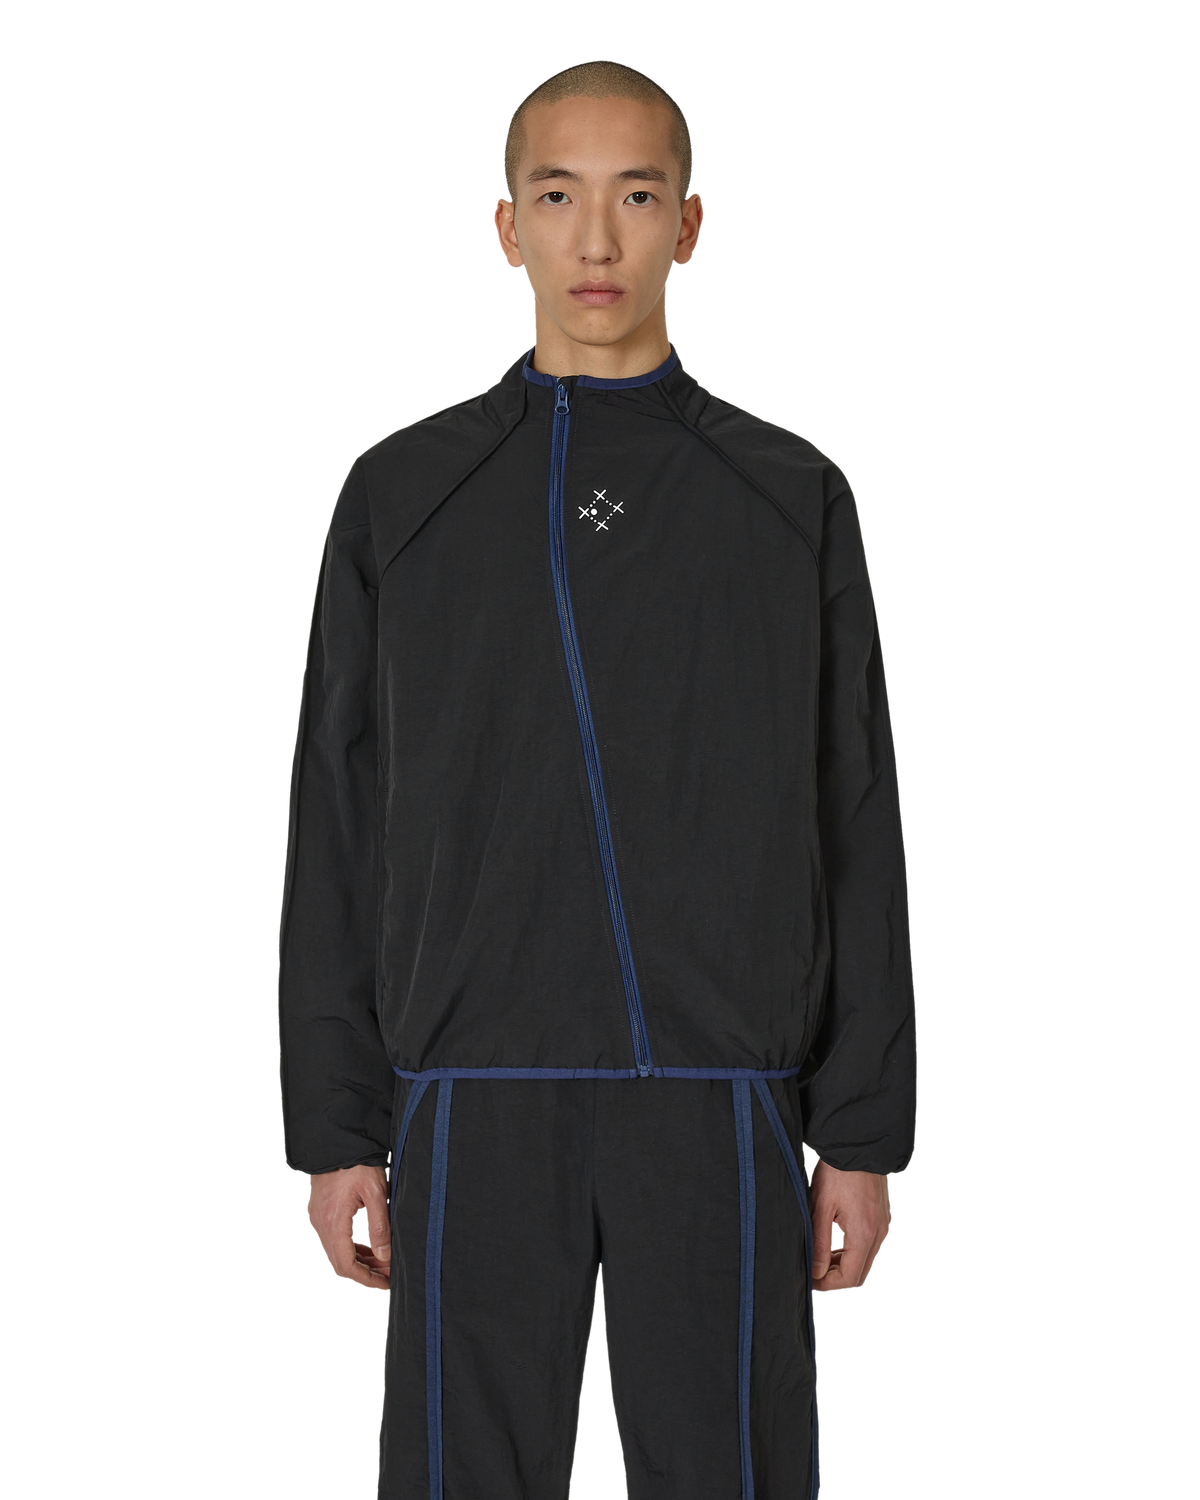 _J.L - A.L_ _J.L-A.L_ x Sound Sports Windbreaker J297464-S-Black front